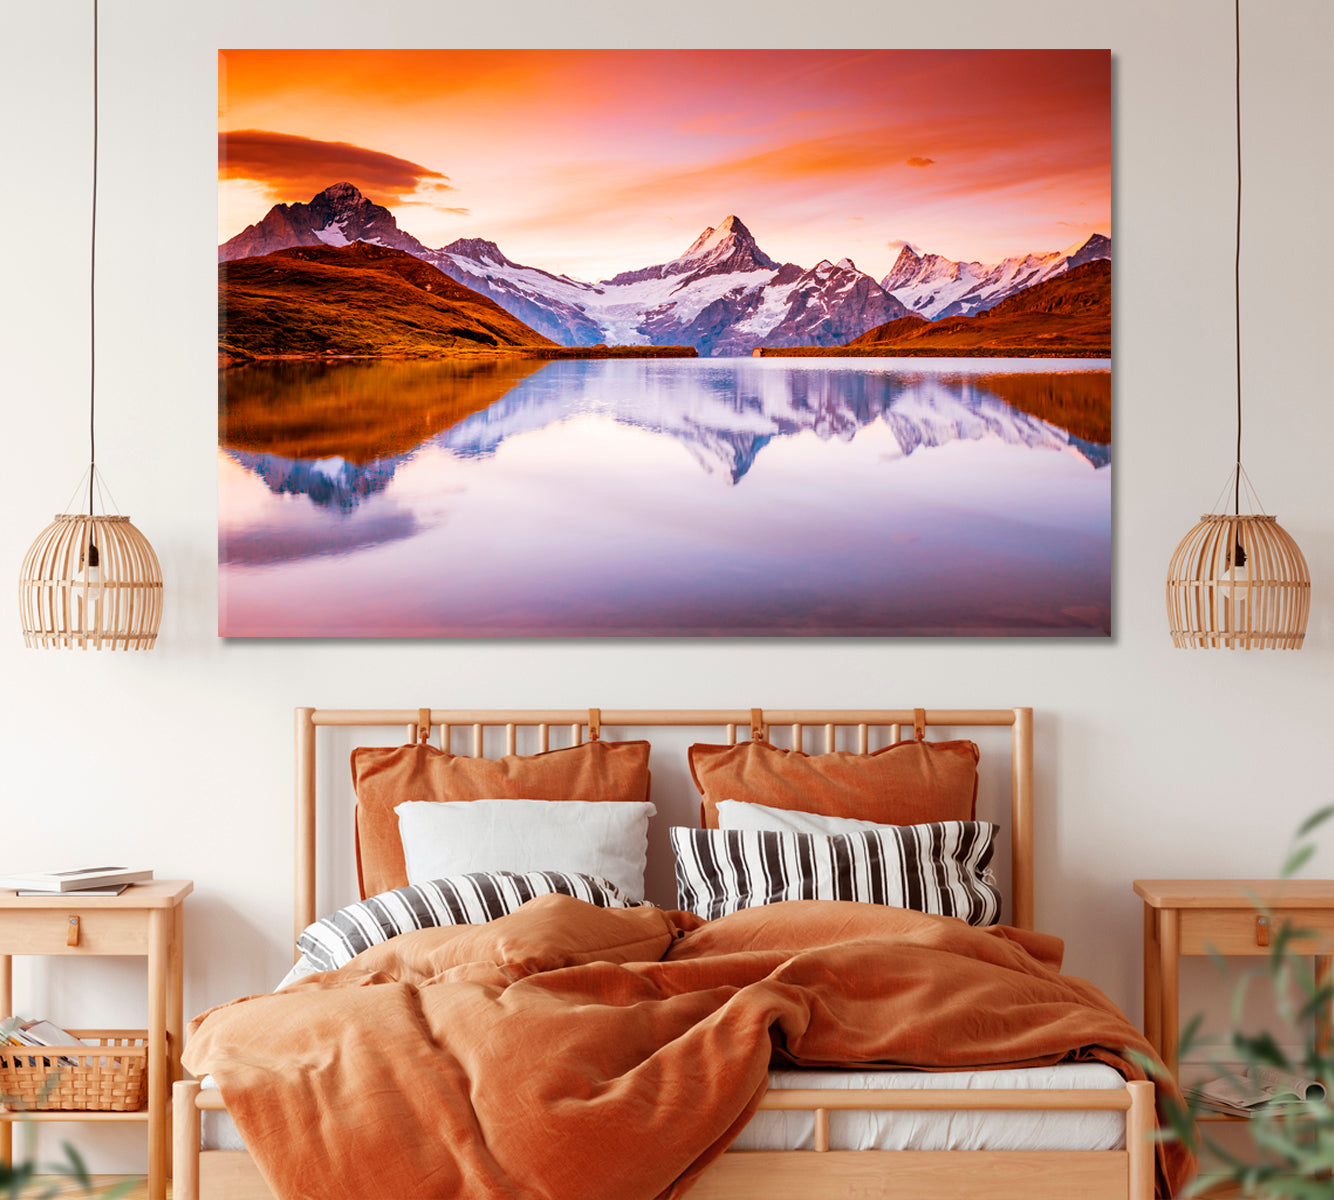 Swiss Alps Mountains Landscape Canvas Print ArtLexy 1 Panel 24"x16" inches 